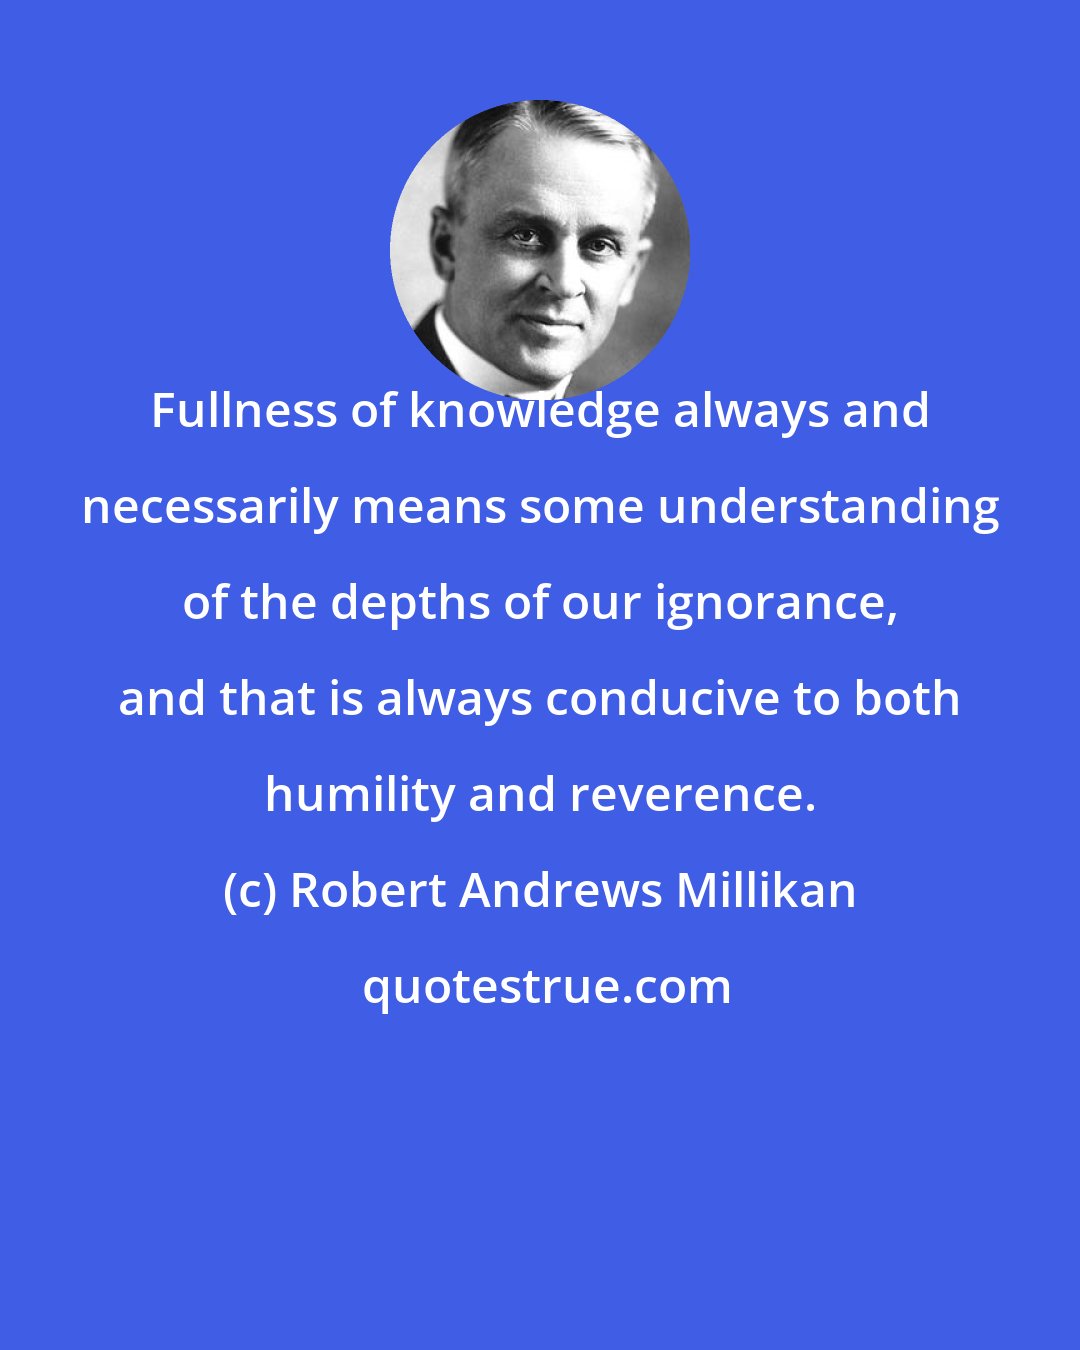 Robert Andrews Millikan: Fullness of knowledge always and necessarily means some understanding of the depths of our ignorance, and that is always conducive to both humility and reverence.